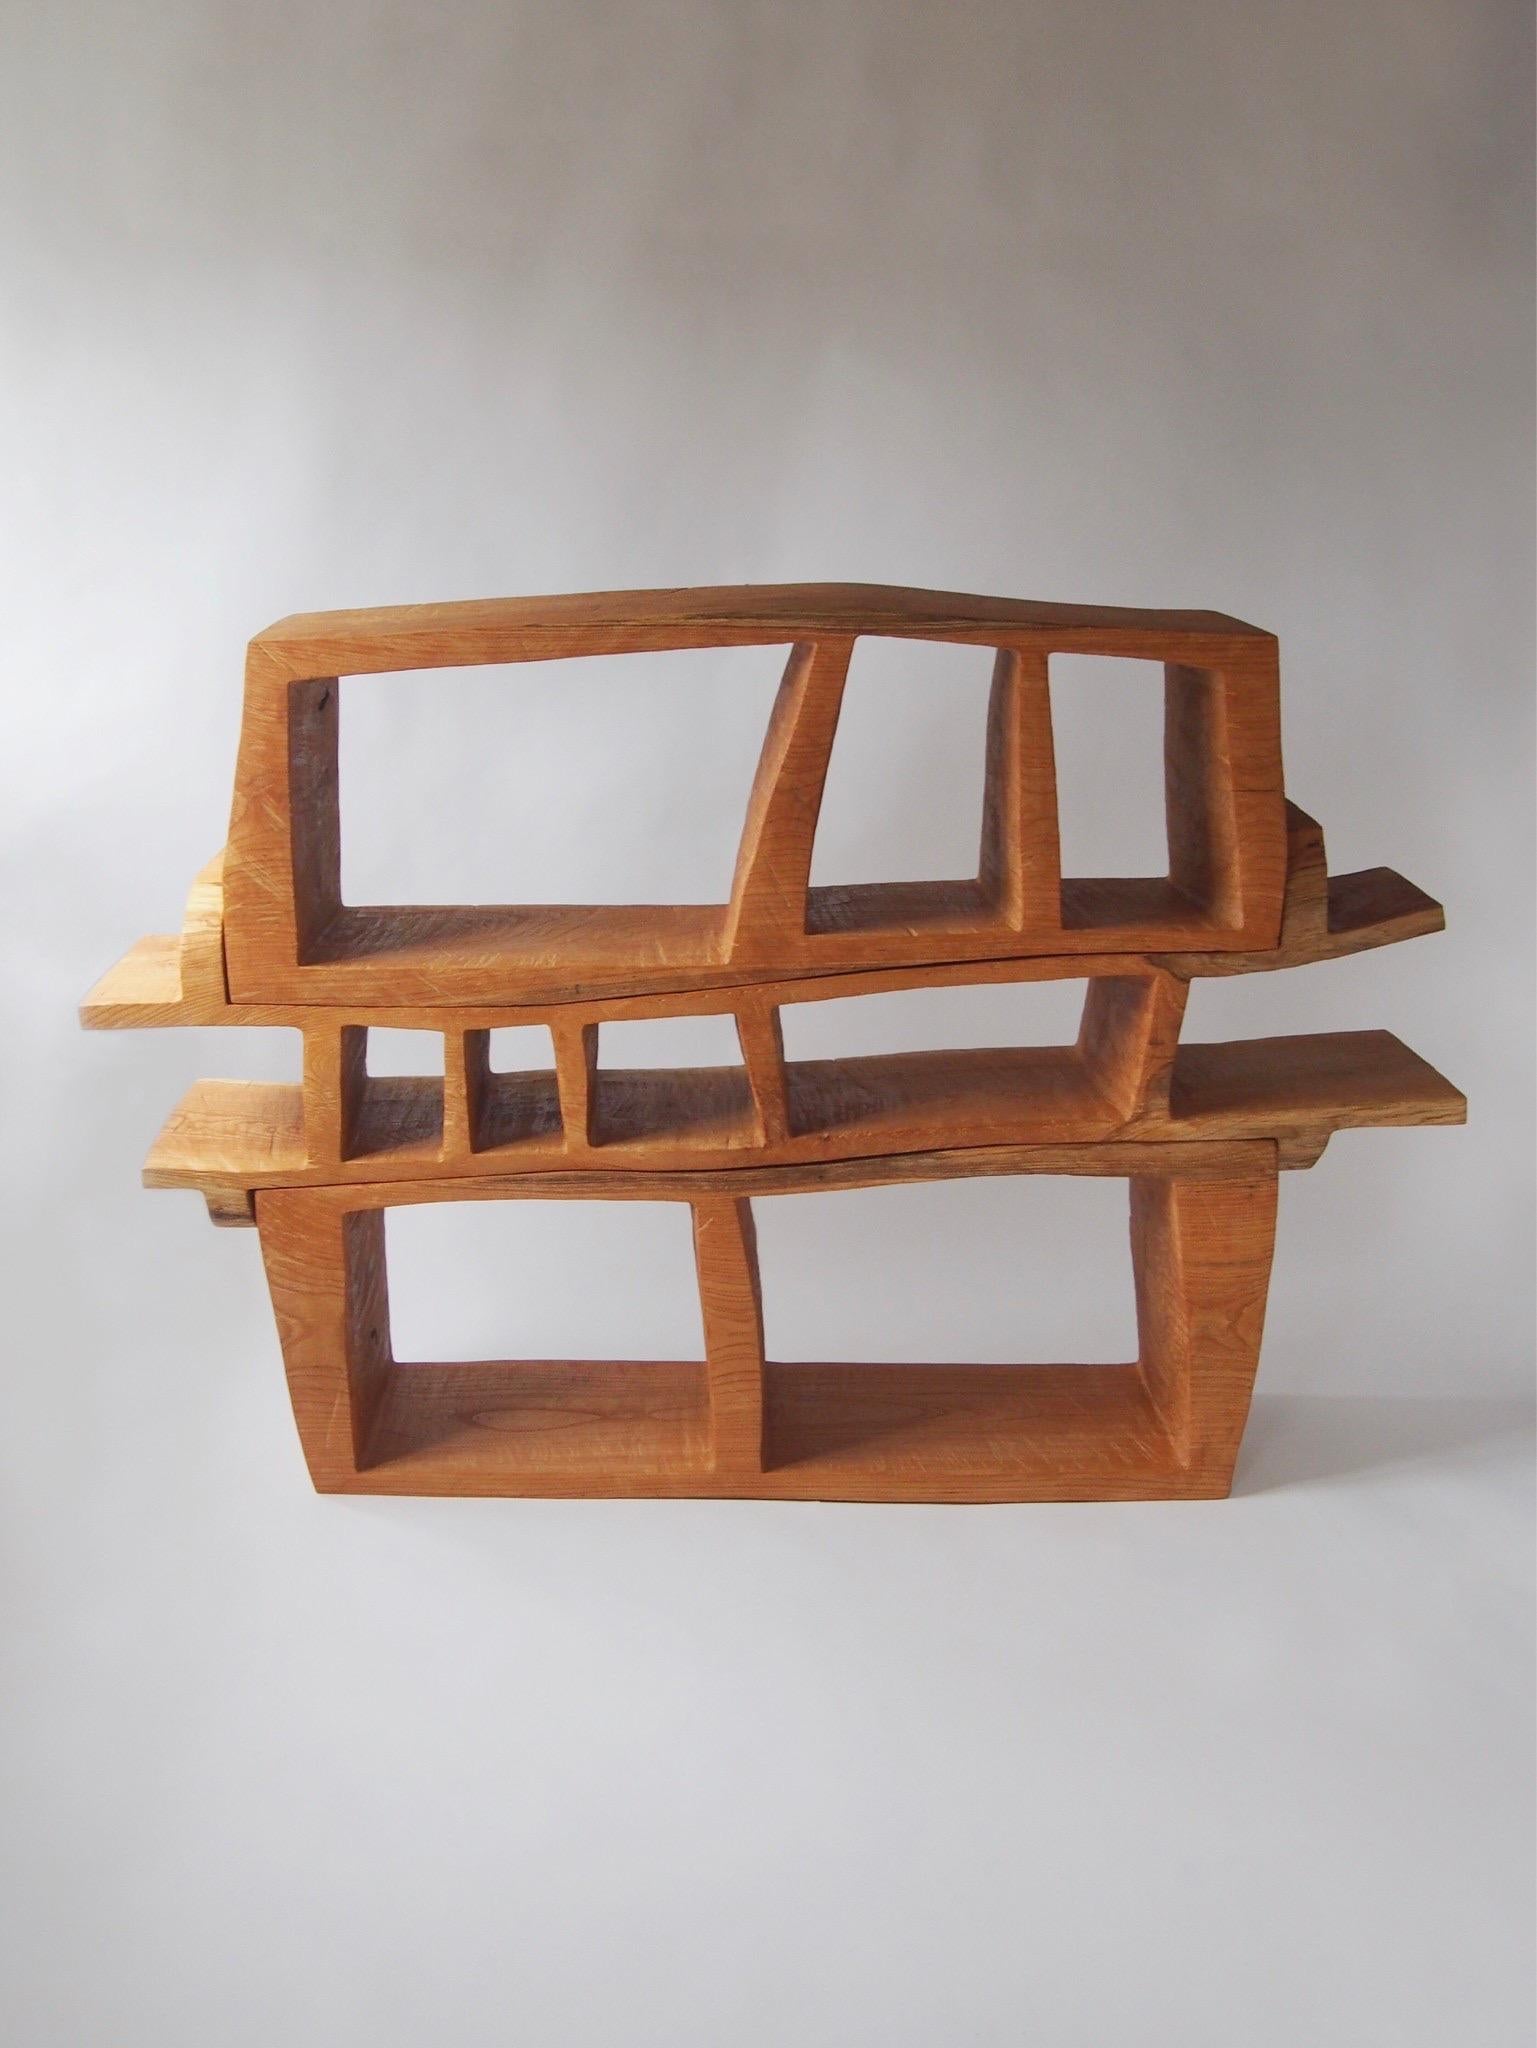 Name: Forest house
Sculptural table by Zougei carved furniture
Material: Zelkova
This shelf consists of three separate shelves. 

This work is carved from log with some kinds of chainsaws.
Most of wood used for Nishimura's works are unable to use